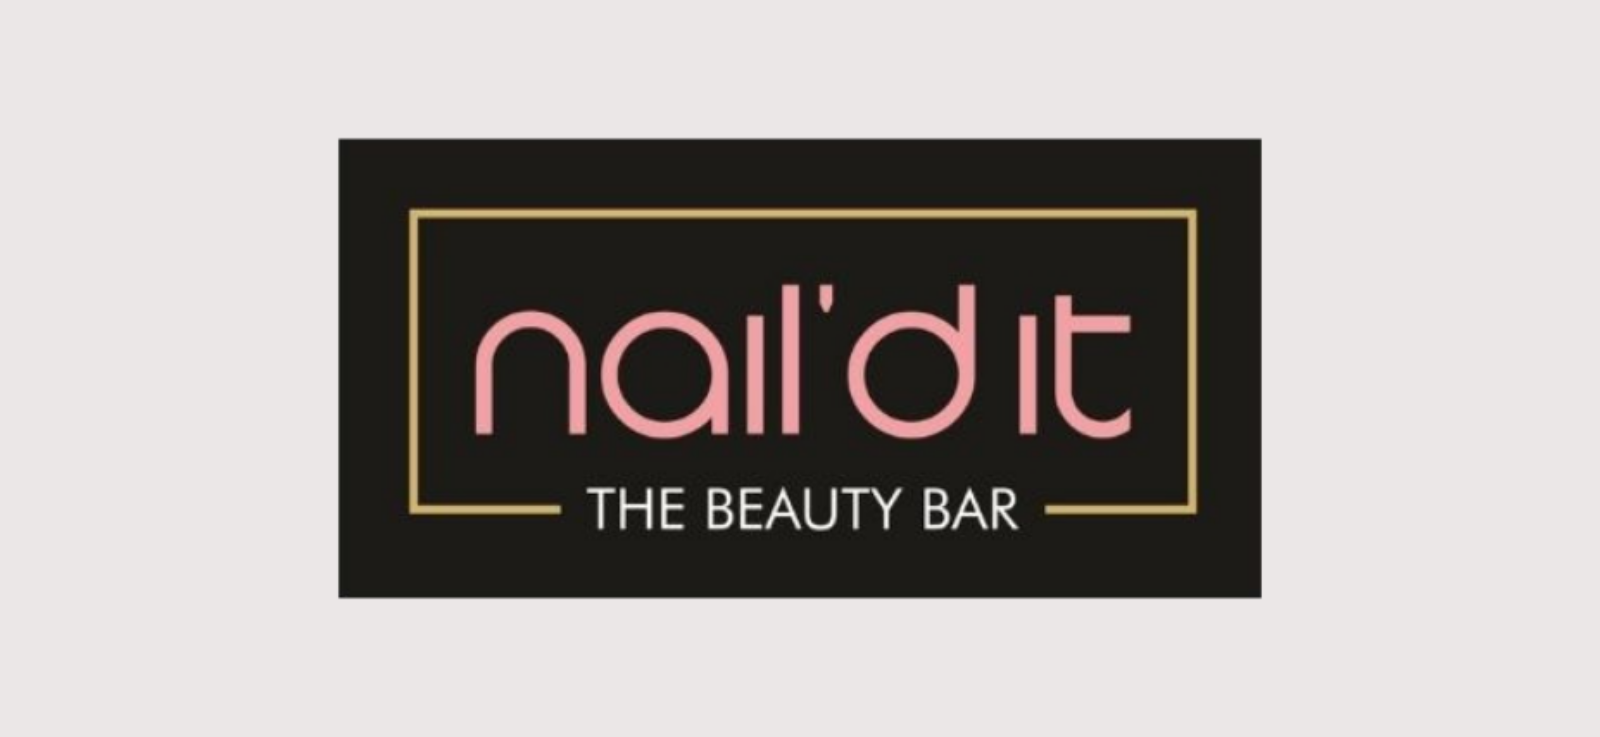 Online designs for Nail'd It